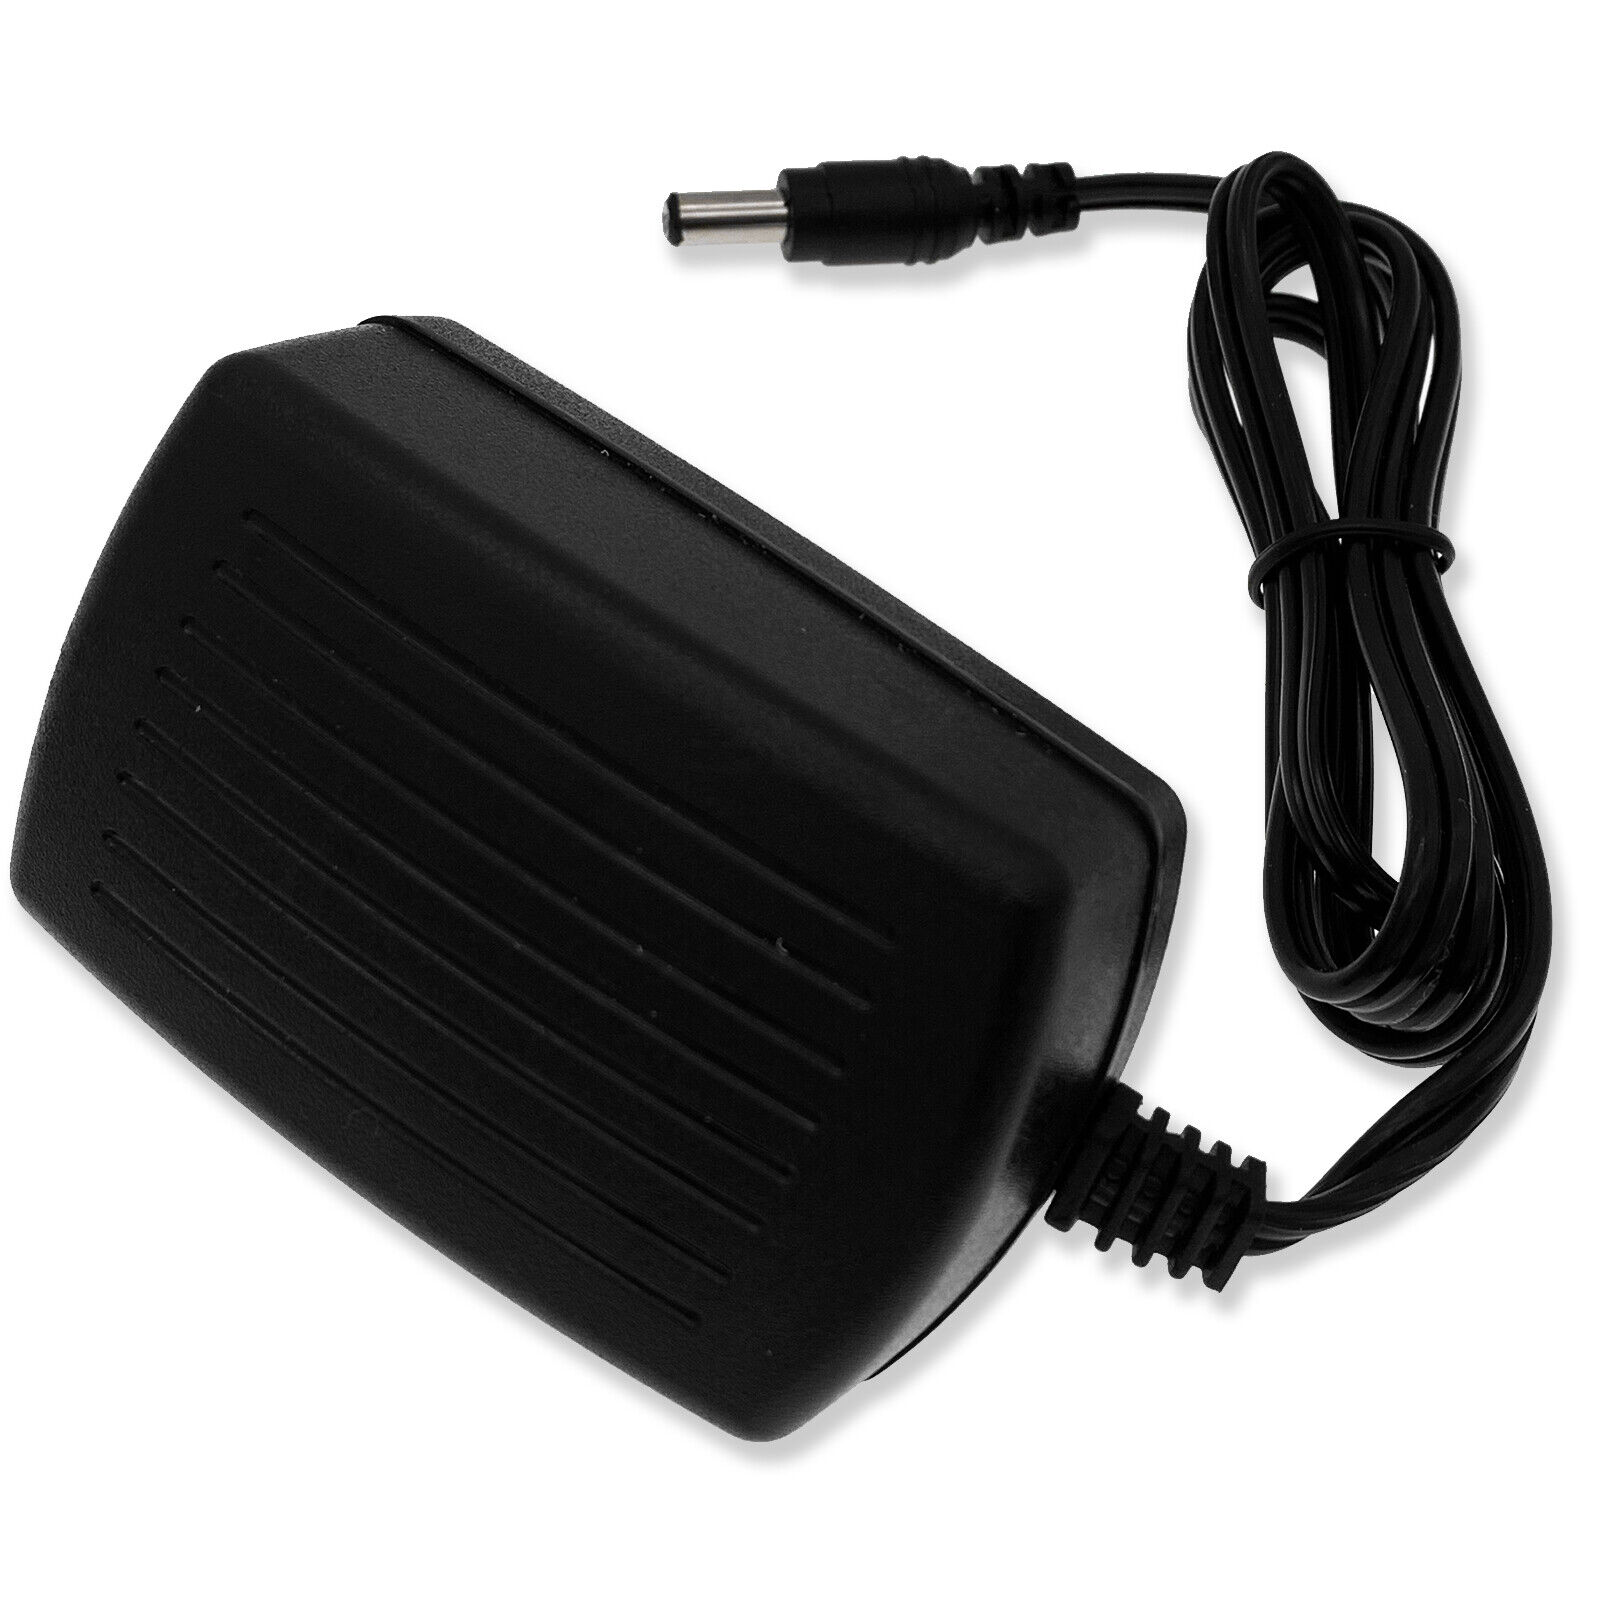 AC adapter 9VAC Digitech PSS3120 GNX3000 GNX4 GNX3 Charger Power Supply cord A replacement AC adapter makes power acces